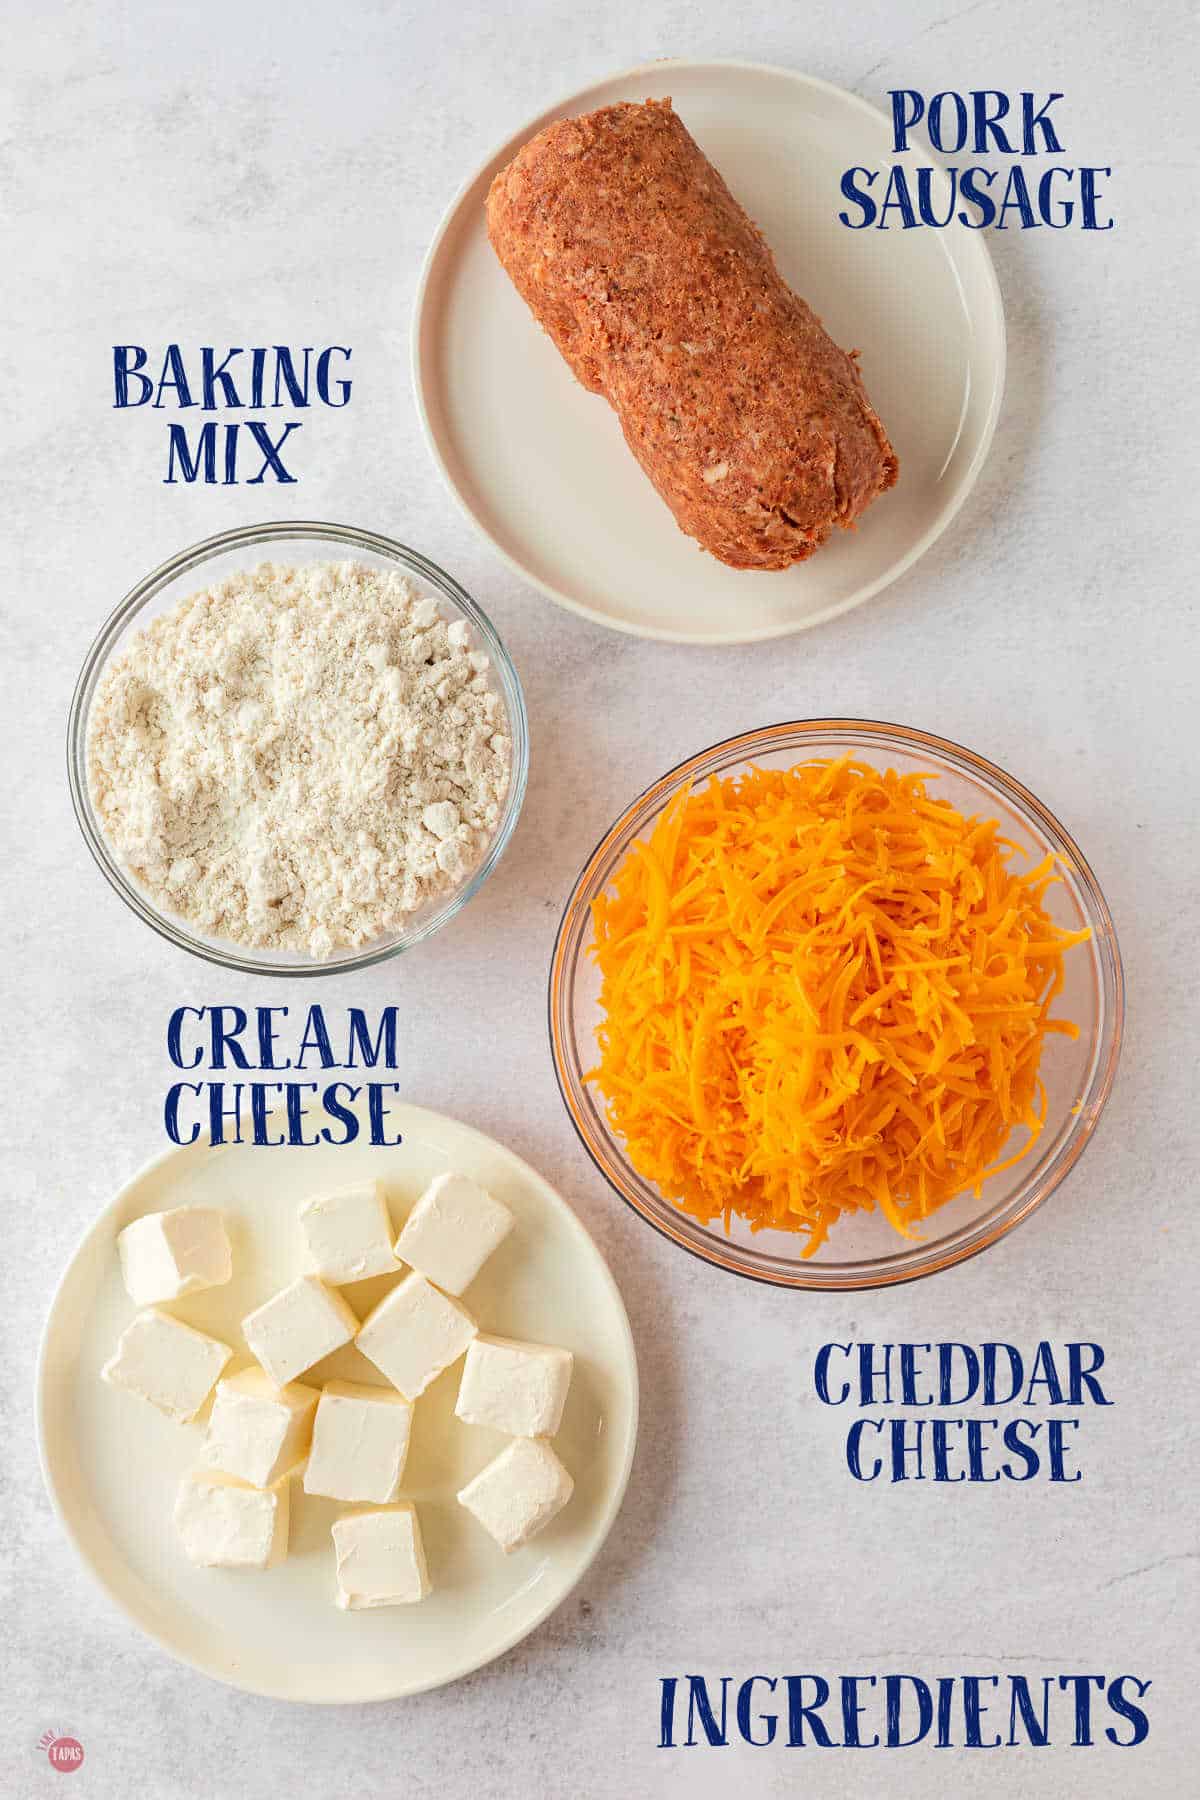 labeled picture of sausage ball ingredients not showing exact measurements